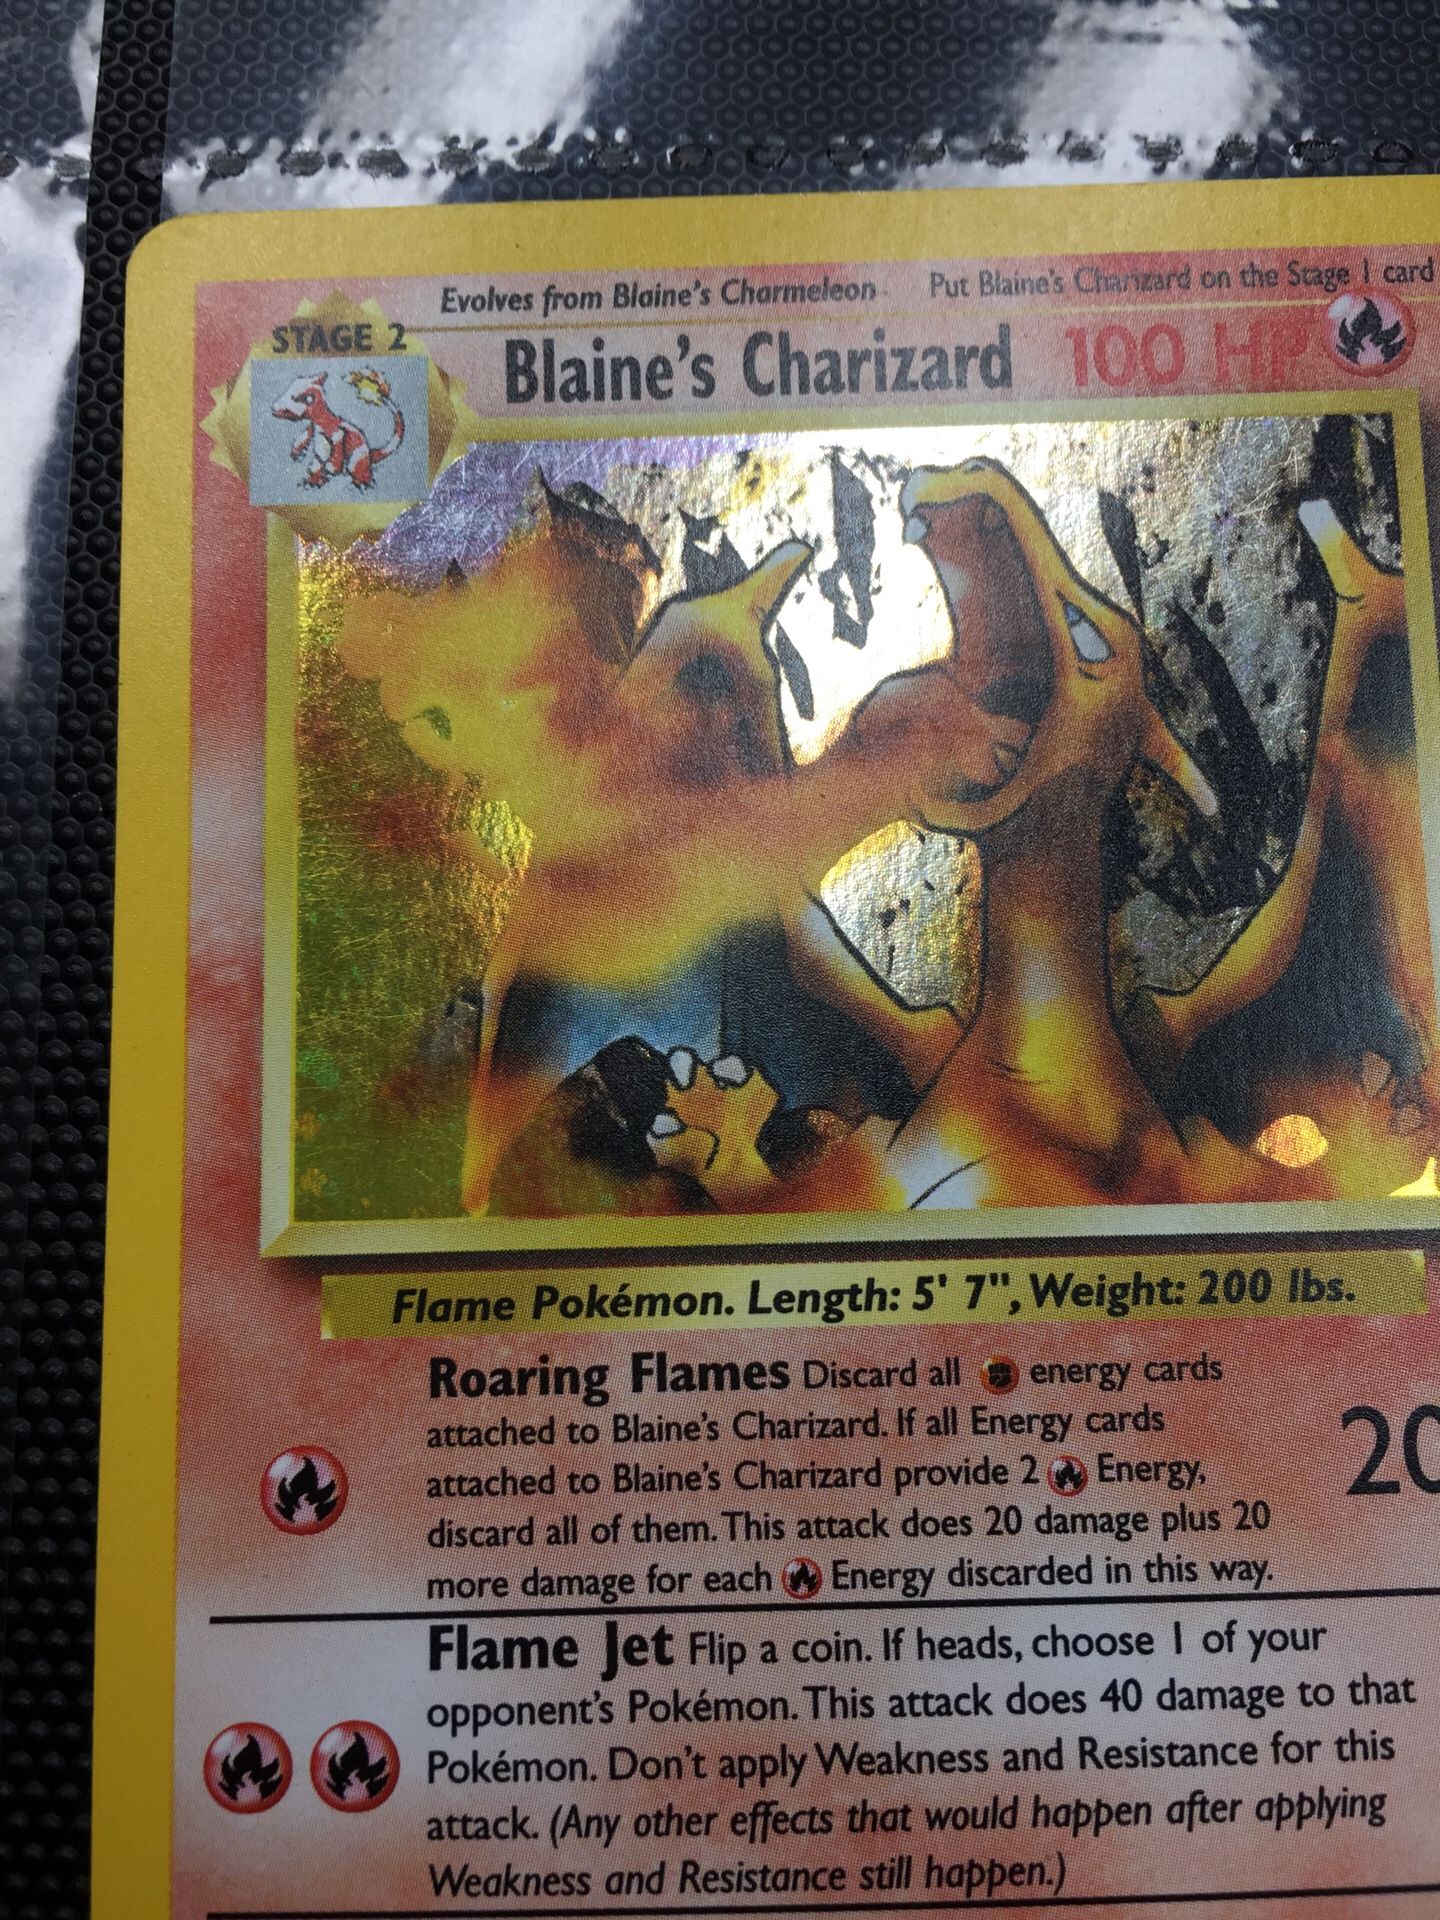 Charizard pokemon card Lot for Sale in Vancouver, WA - OfferUp